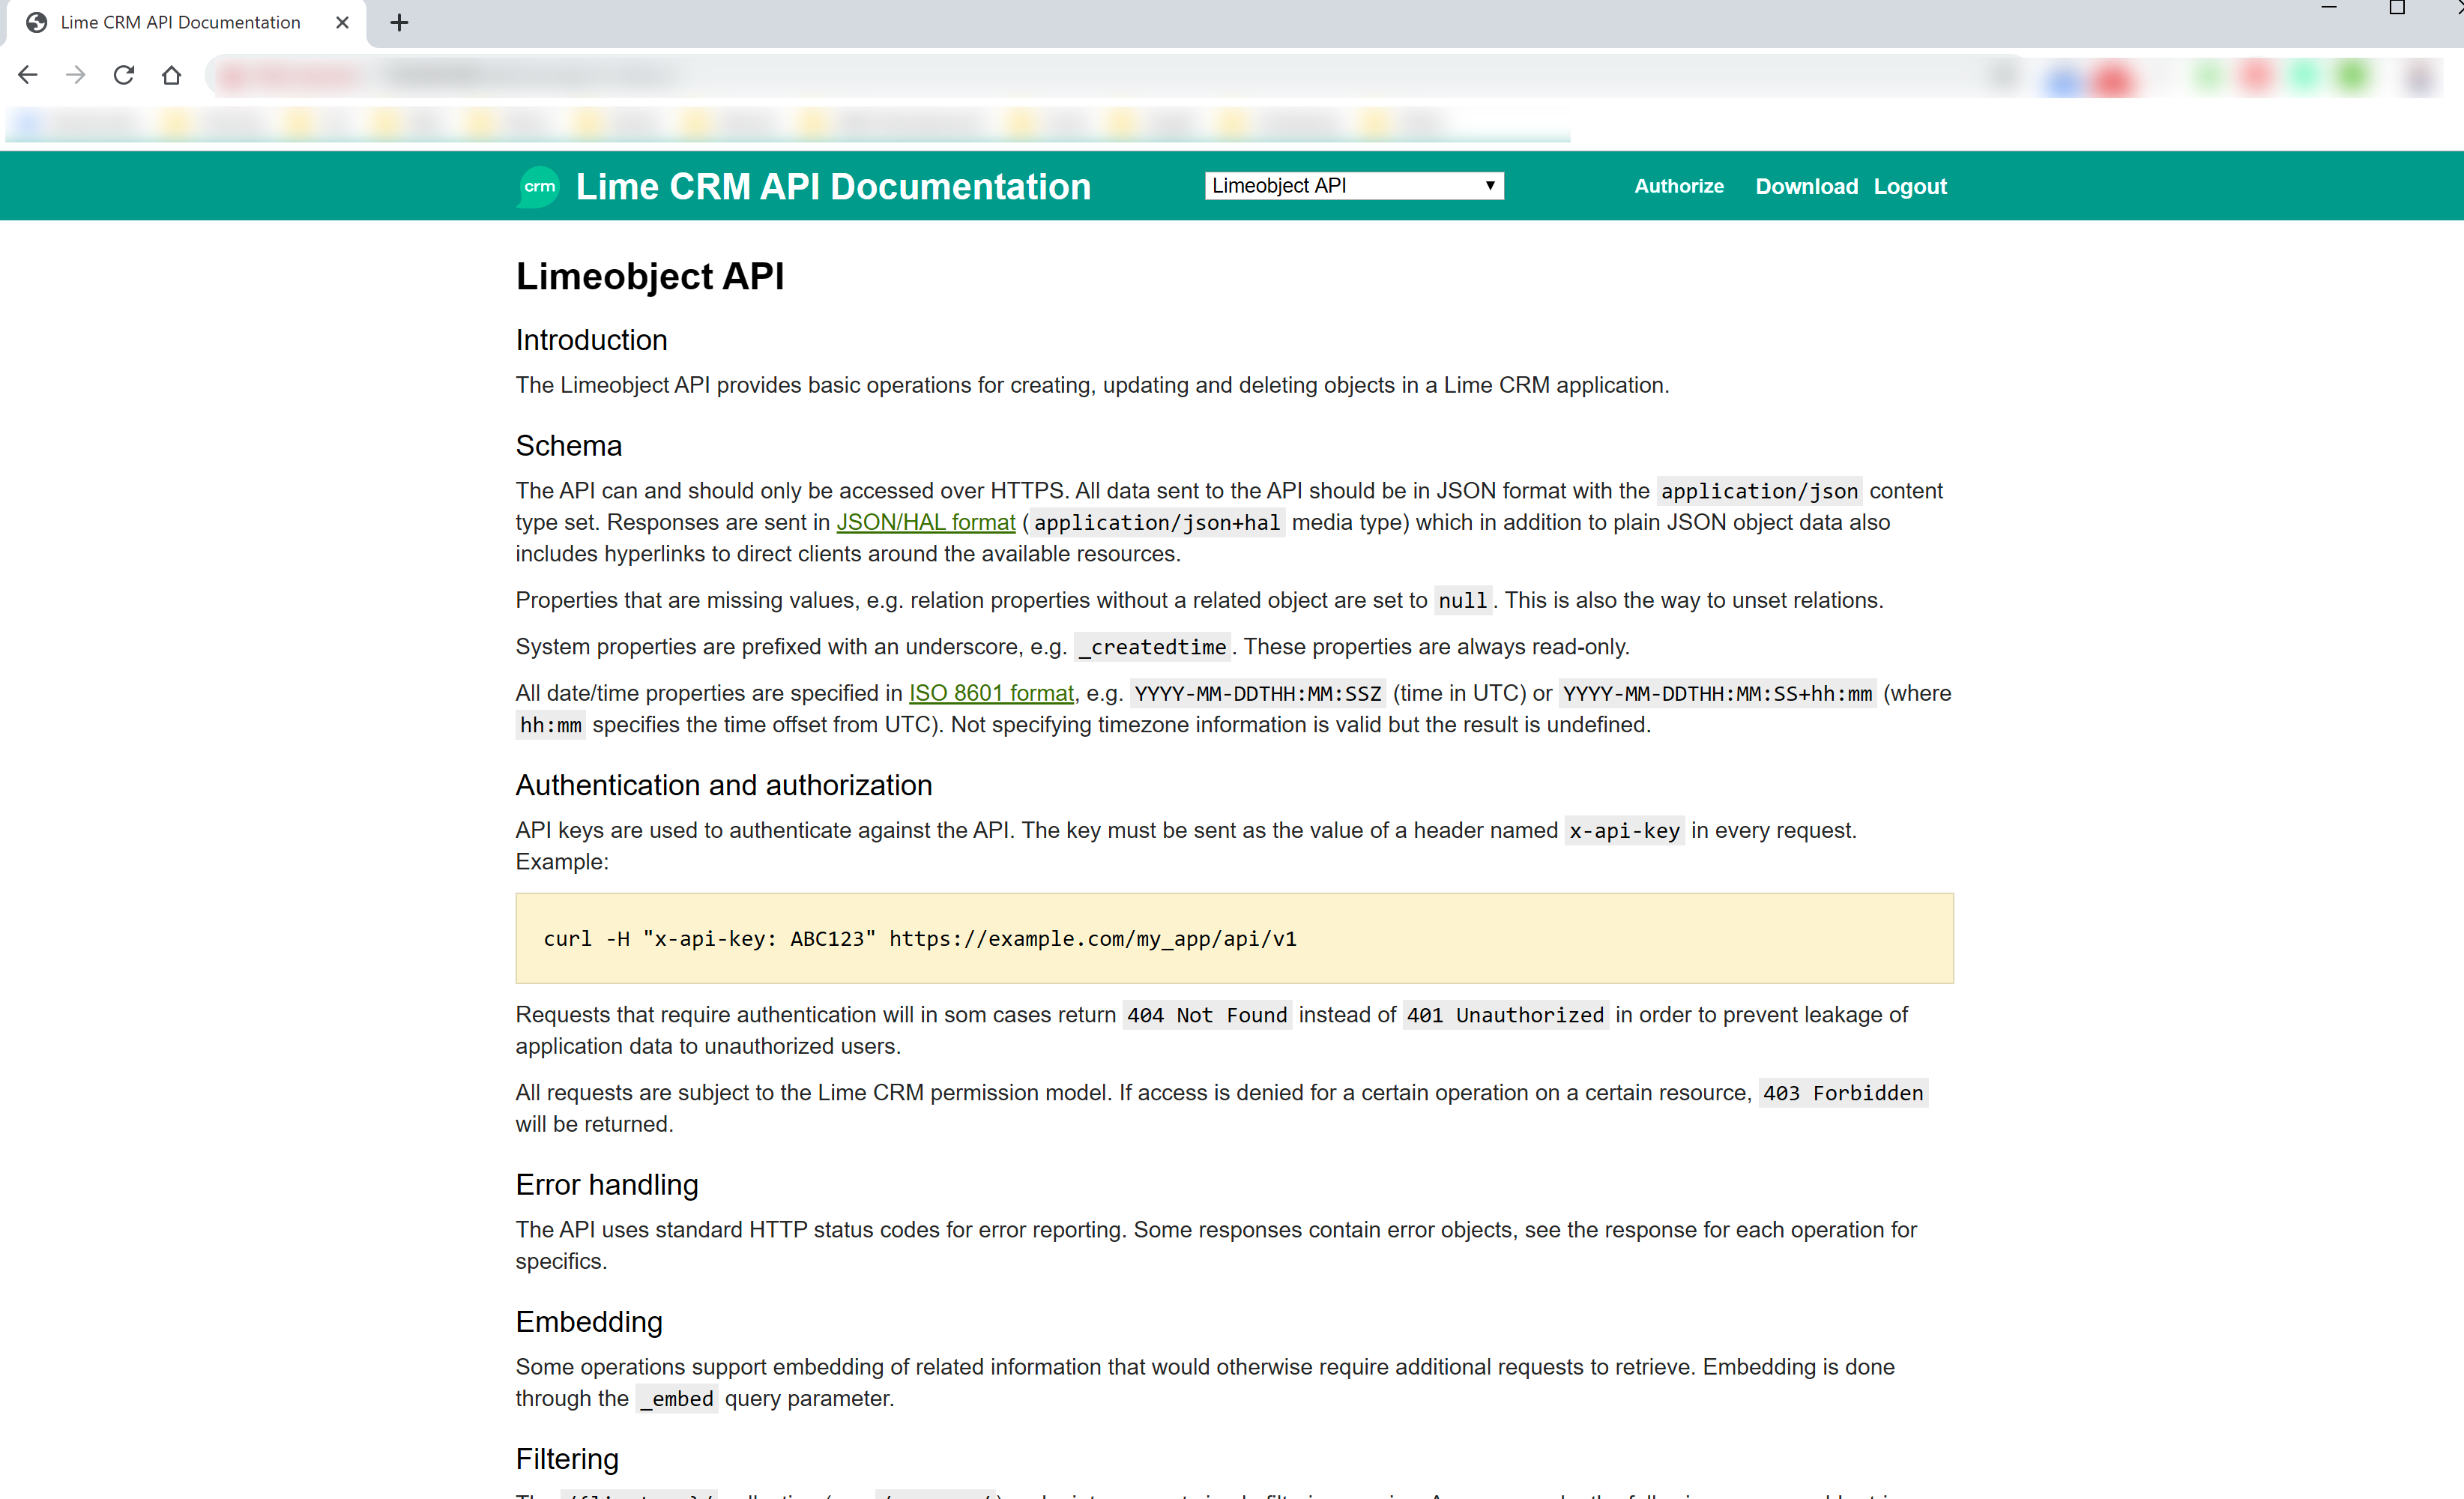 Getting started with using Lime CRM Rest API